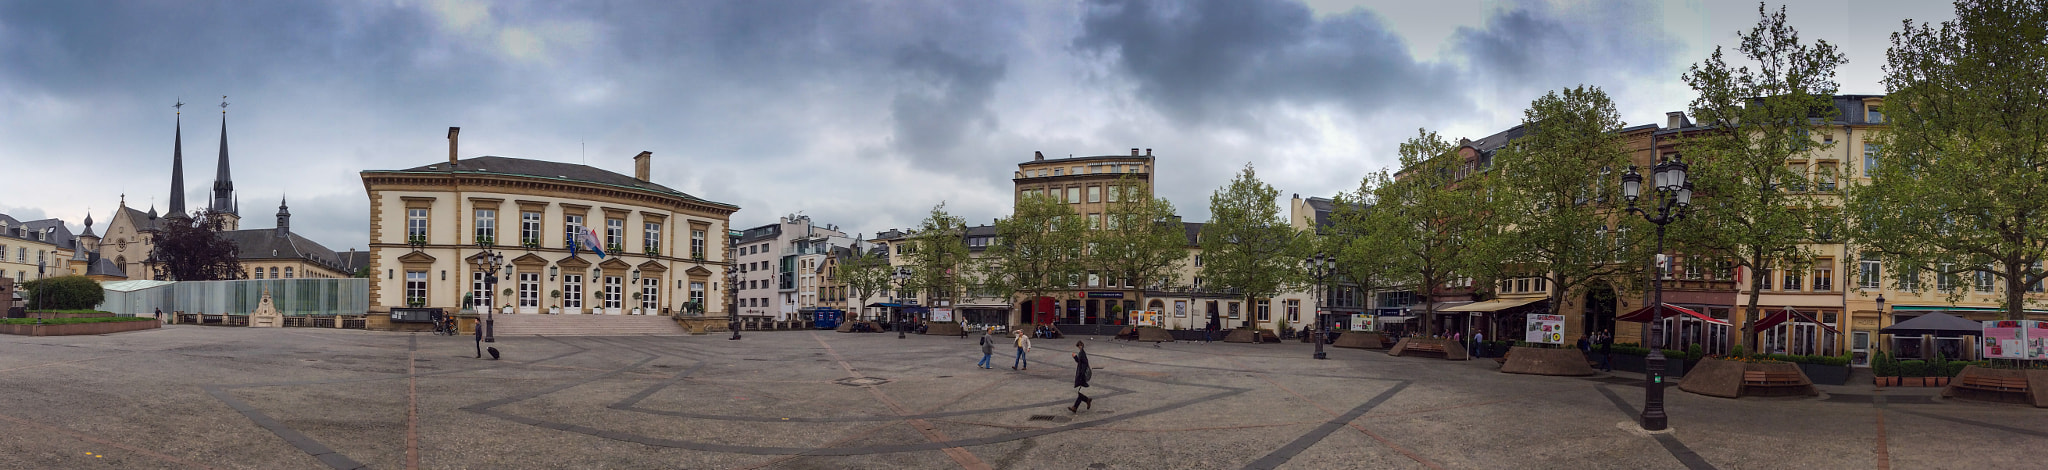 Apple iPad mini 2 sample photo. Place guillaume ii, luxembourg city photography